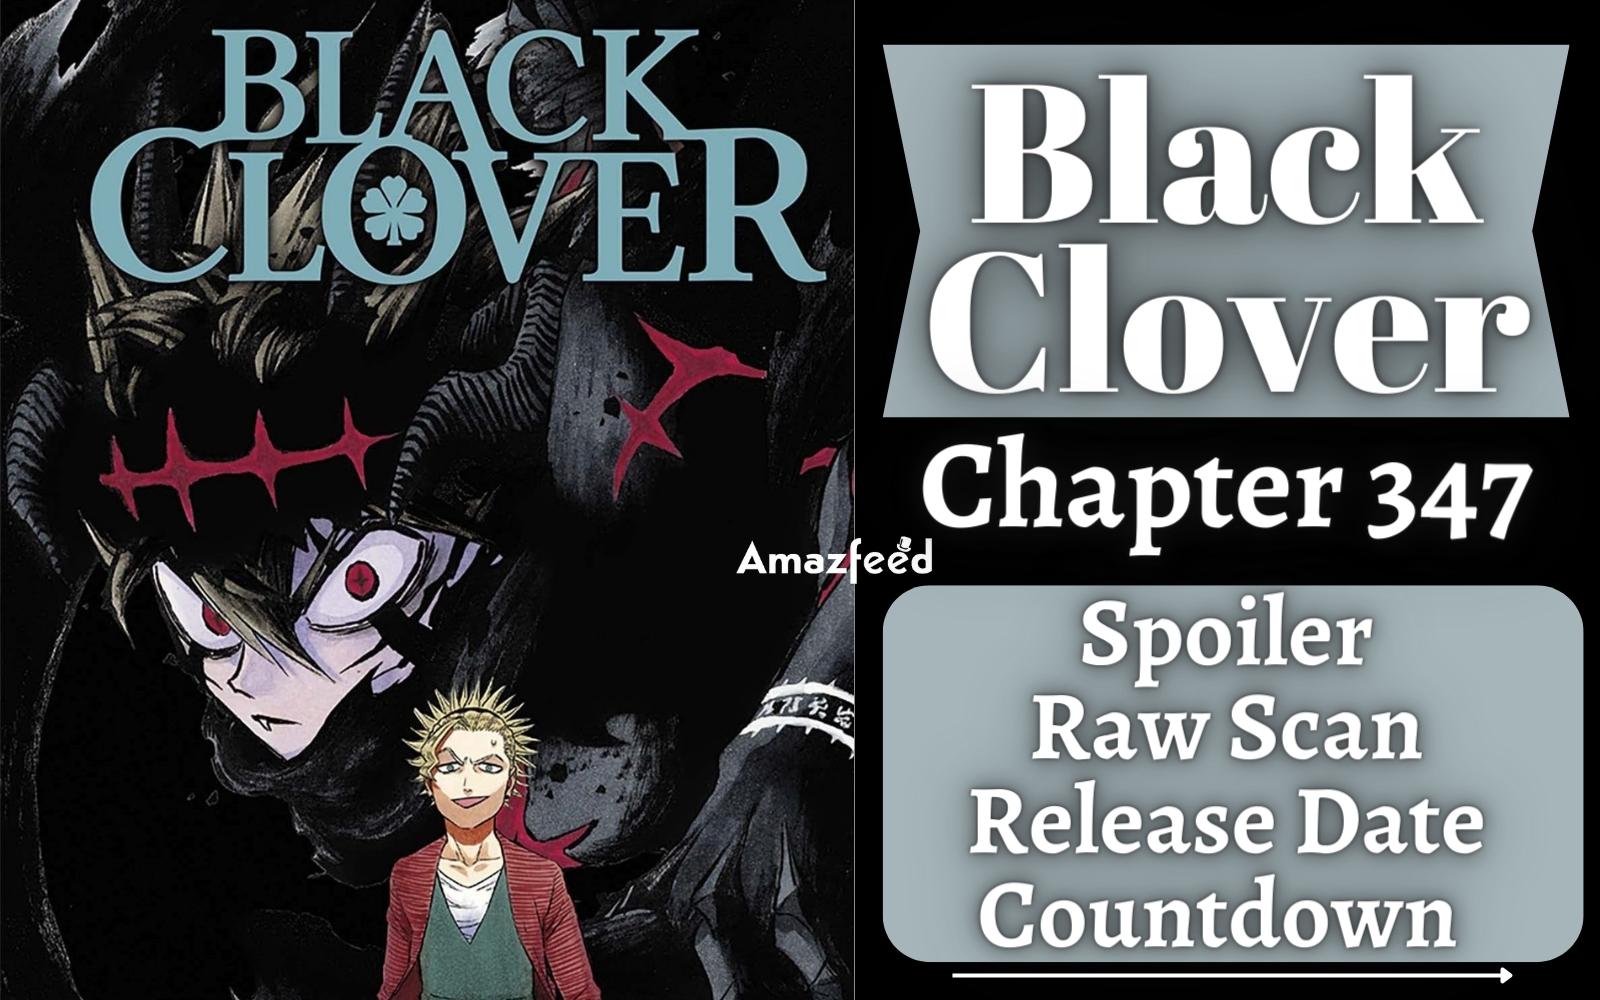 Black Clover Chapter 347 Spoiler, Plot, Raw Scan, Color Page, and Release Date